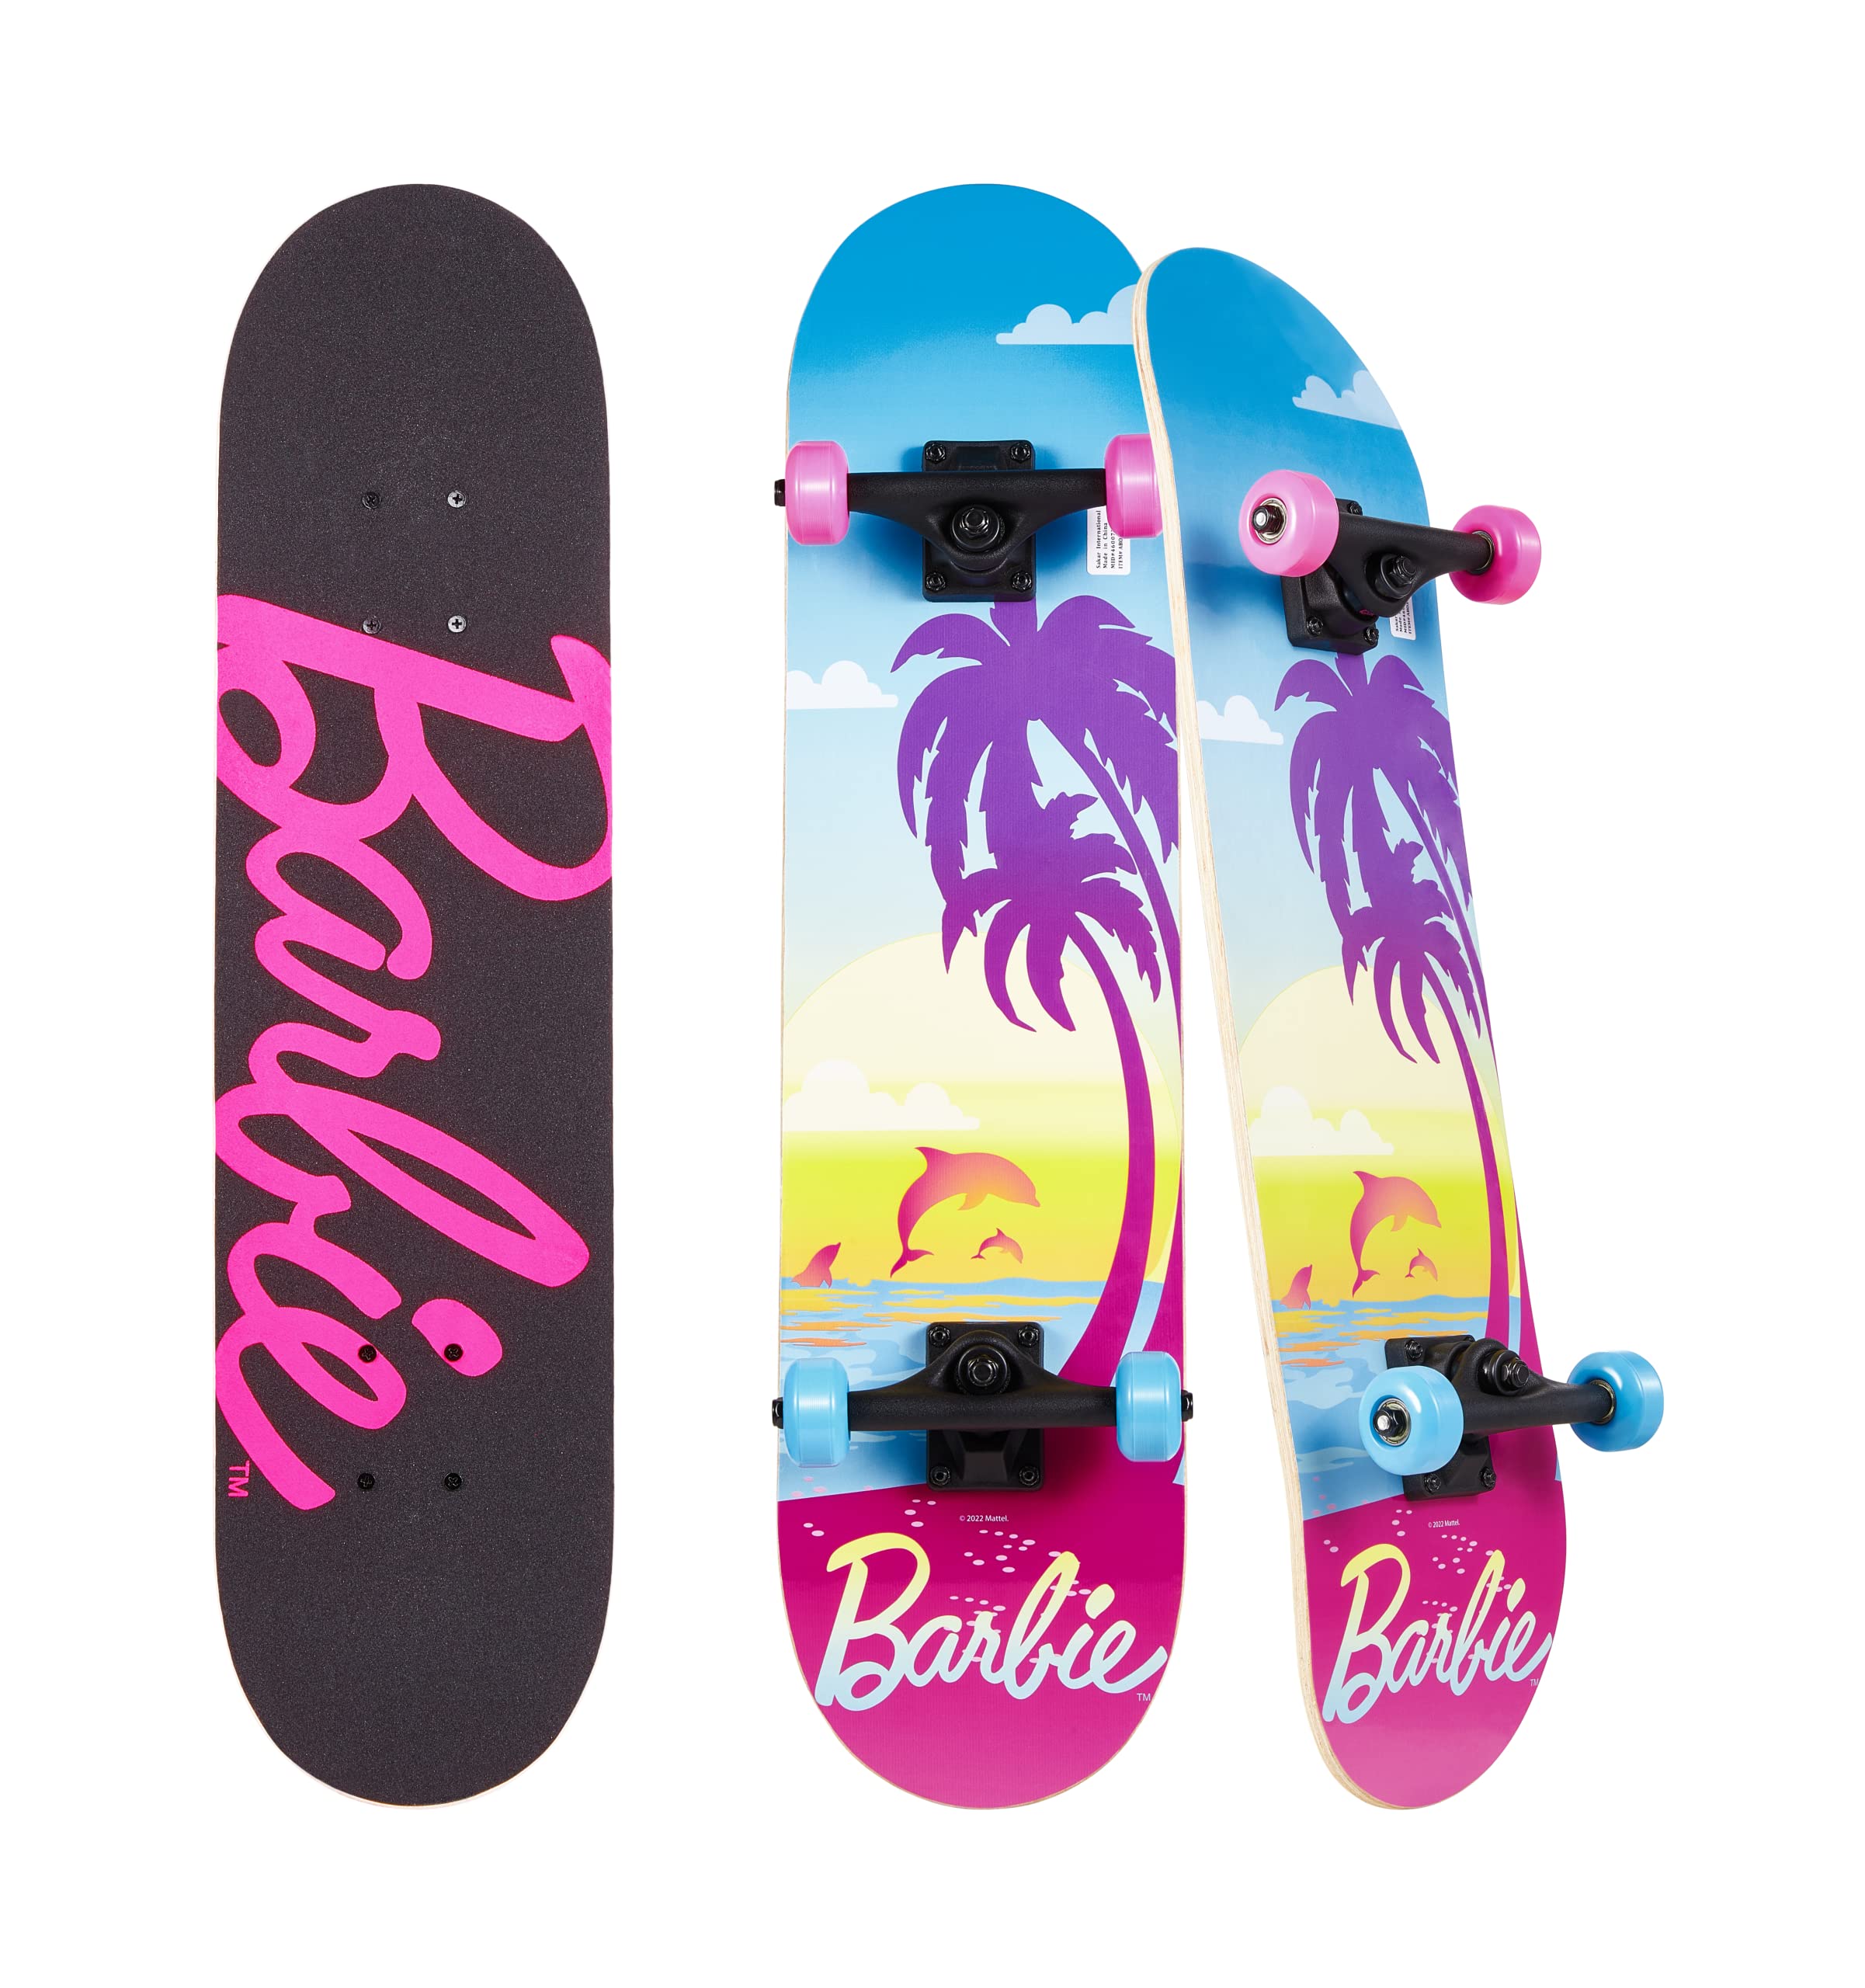 Barbie Skateboard with Printed Graphic Grip Tape - Great for Kids and Teens, Cruiser Skateboard with ABEC 5 Bearings, Durable Deck, Smooth Wheels